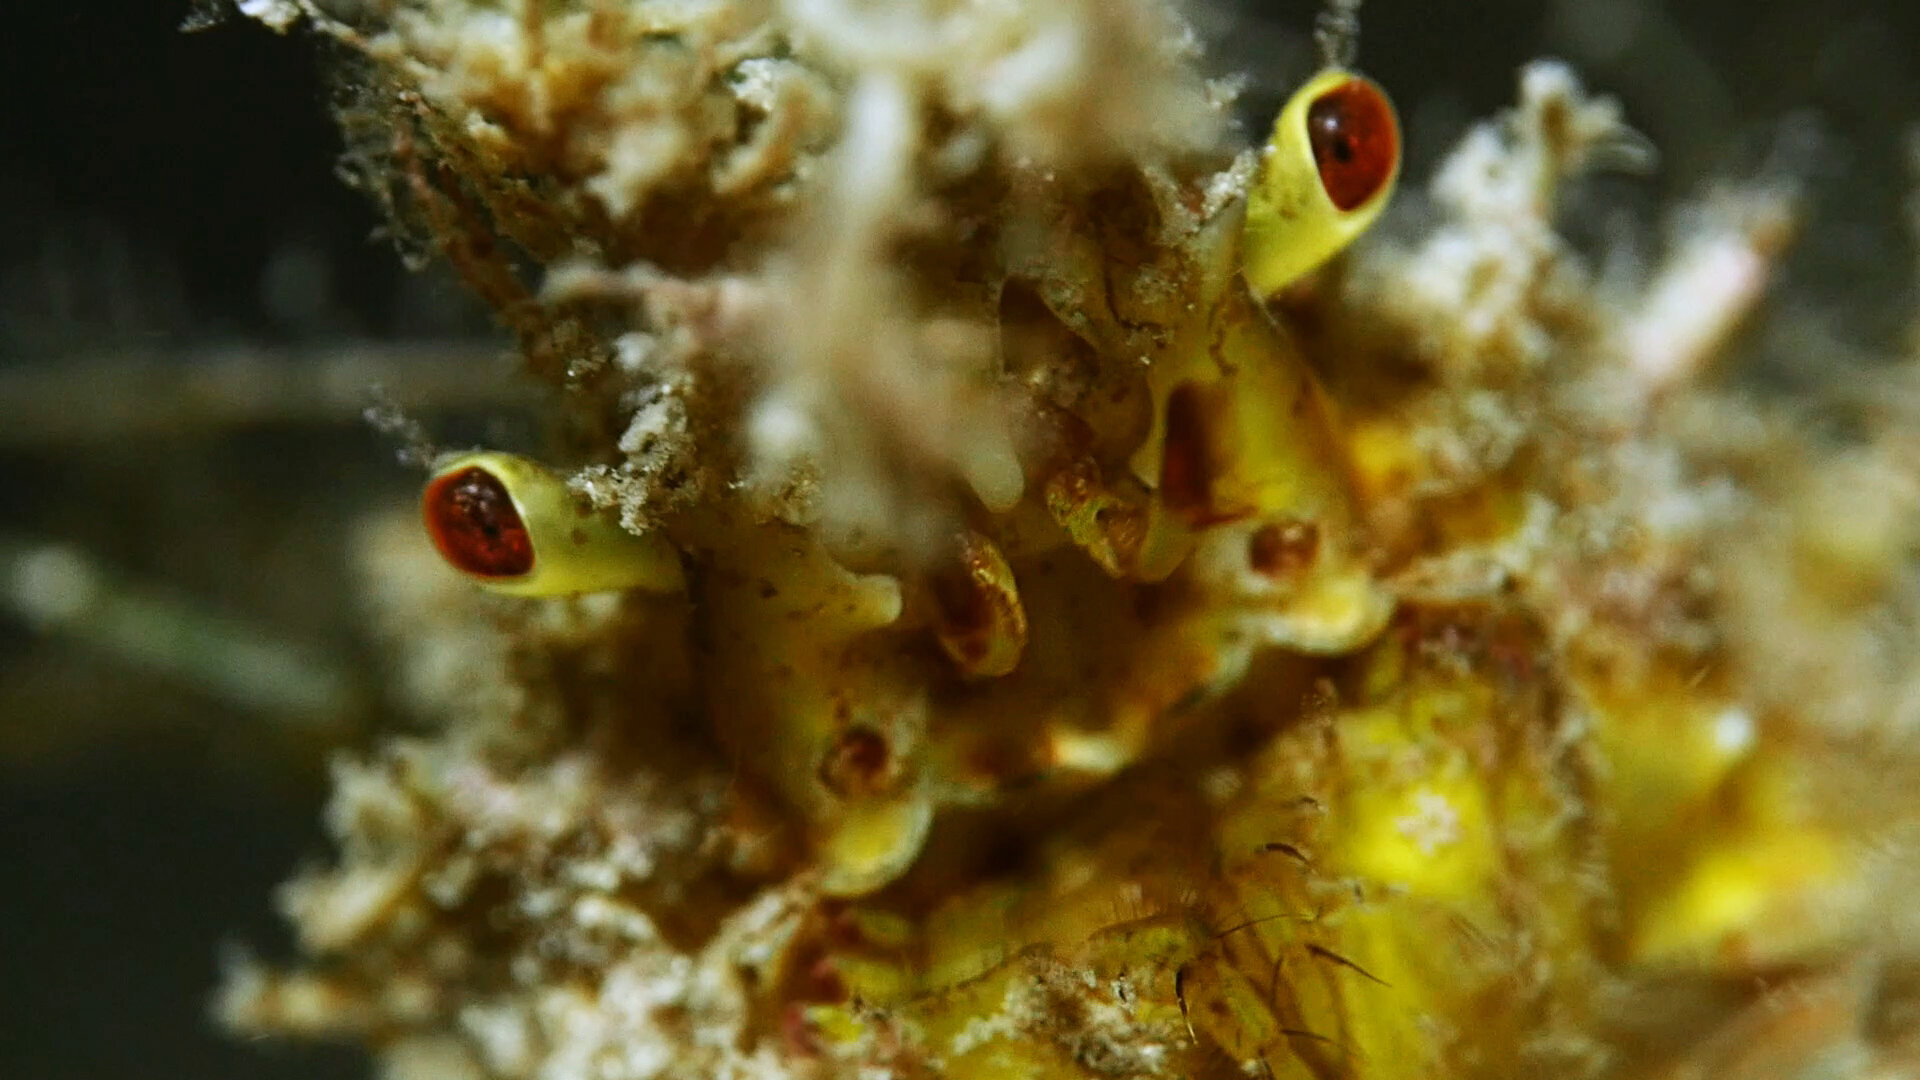 Golden Decorator Crab | Great Southern Reef